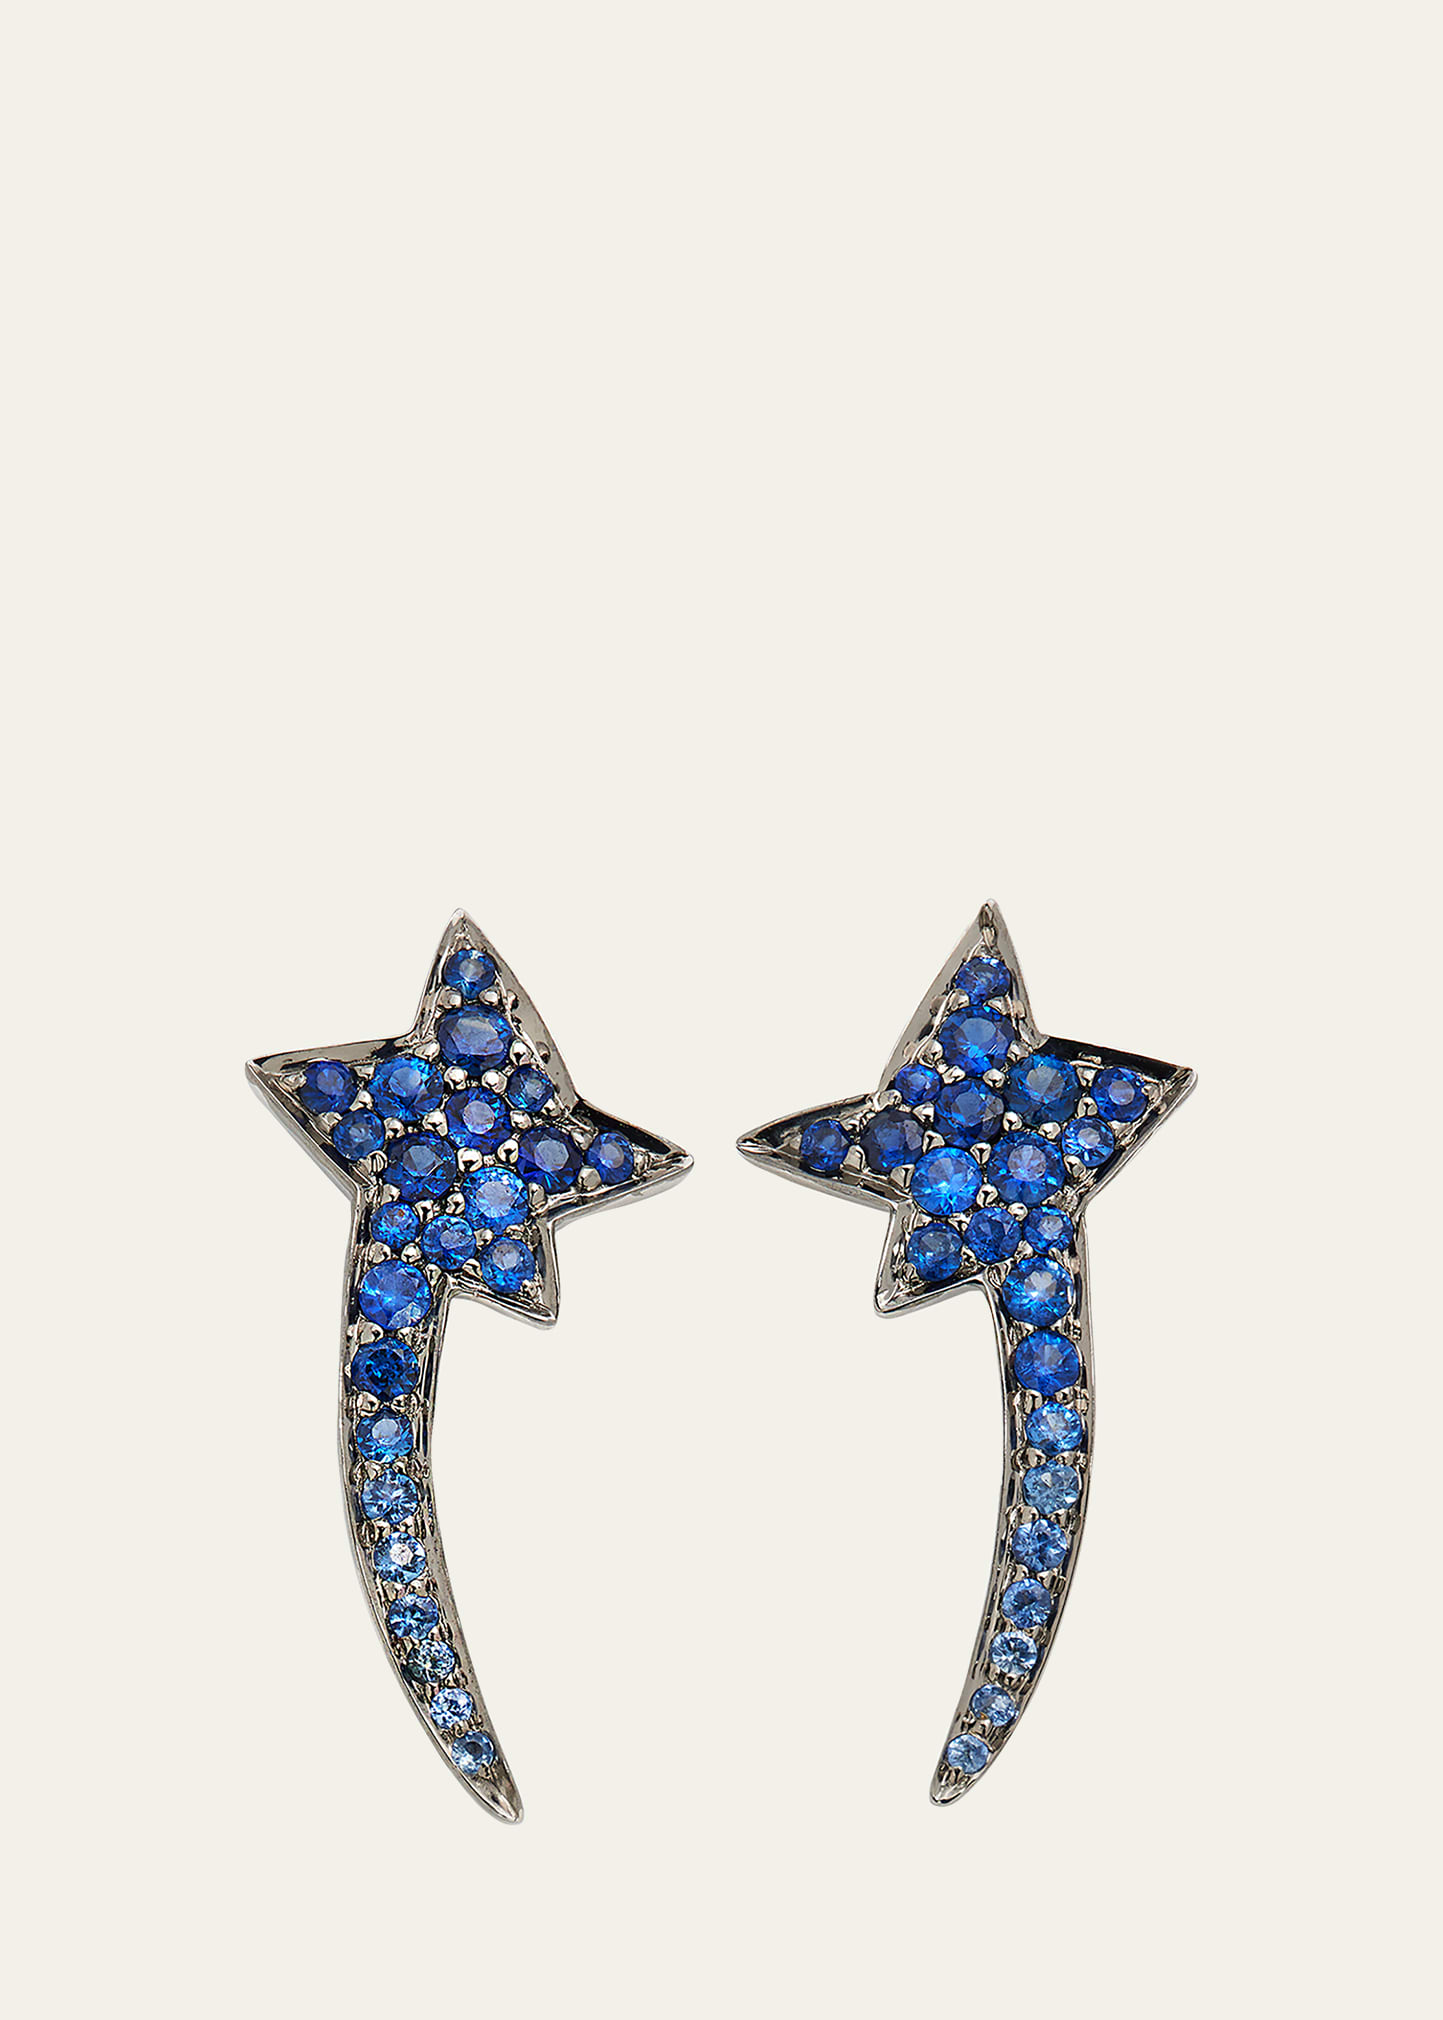 White Gold Blue Sapphire Earrings from The Star Collection